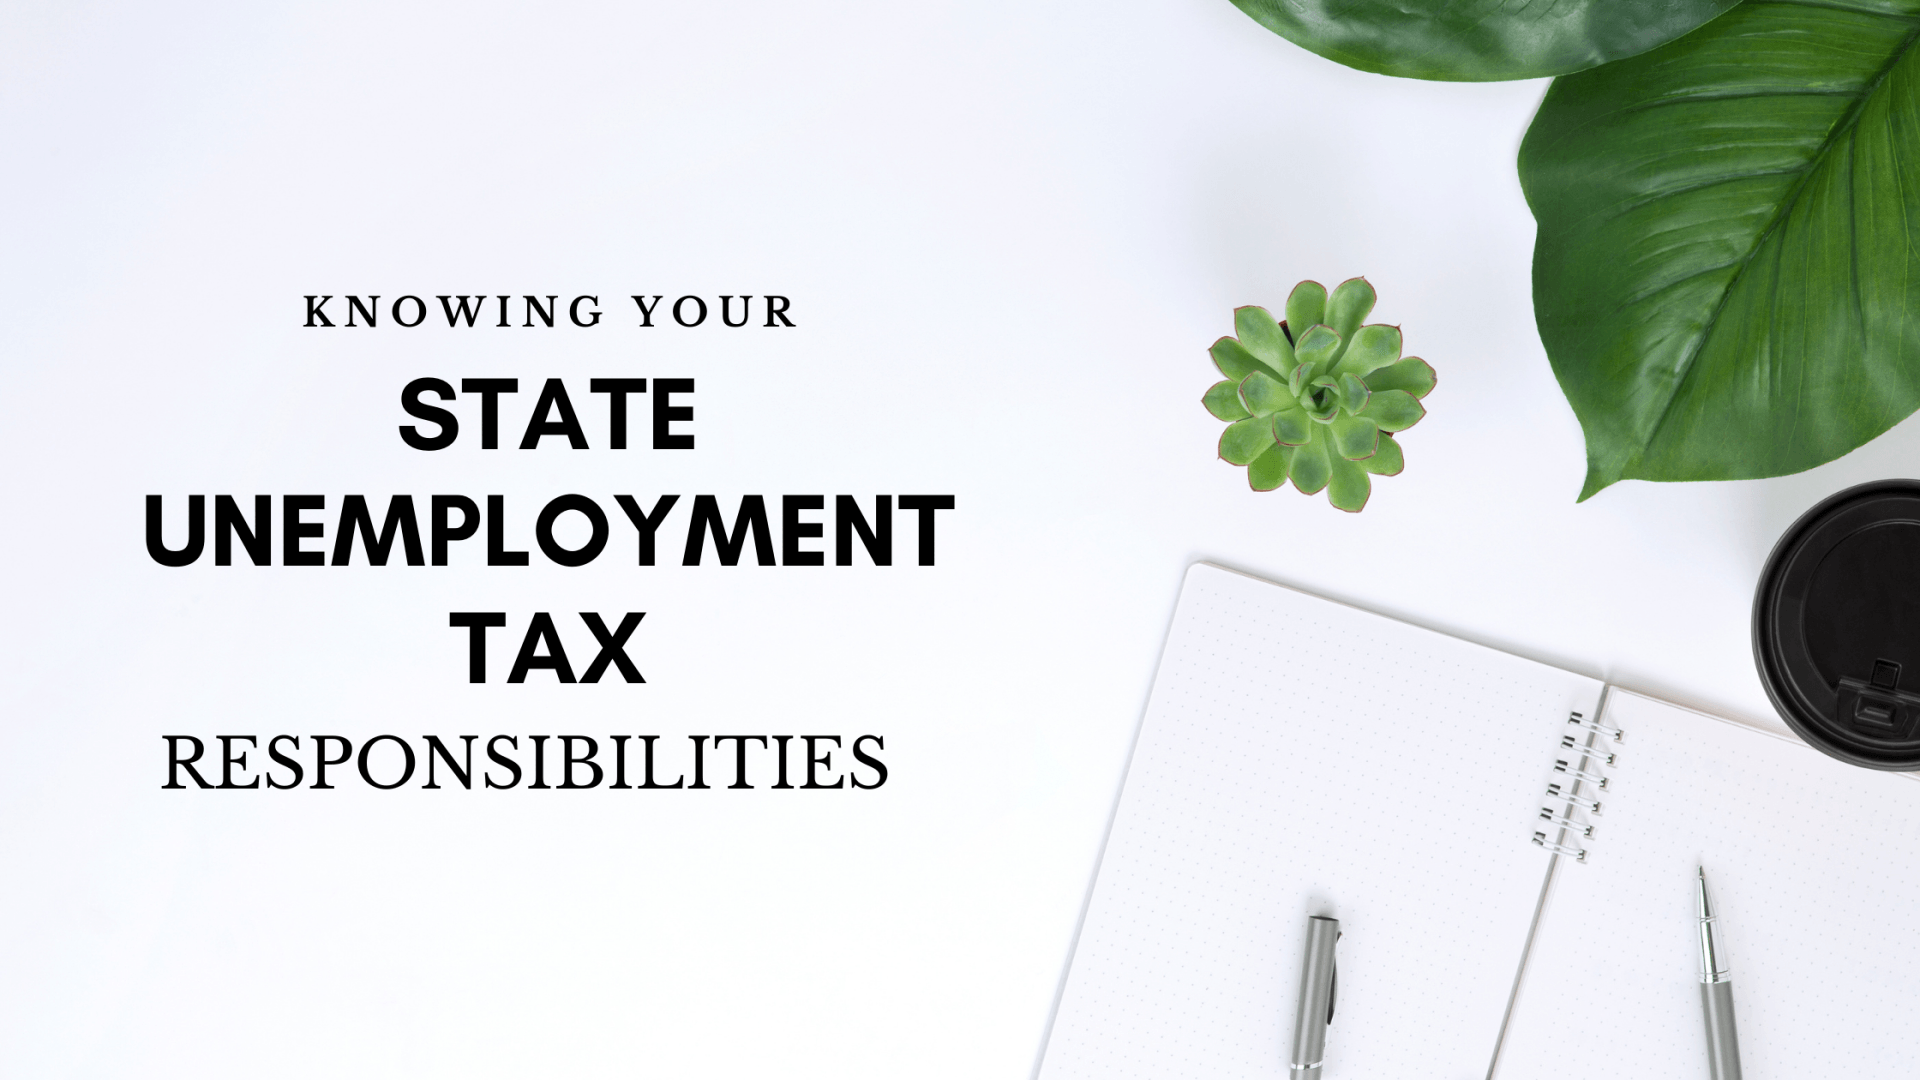 Knowing Your State Unemployment Tax Responsibilities